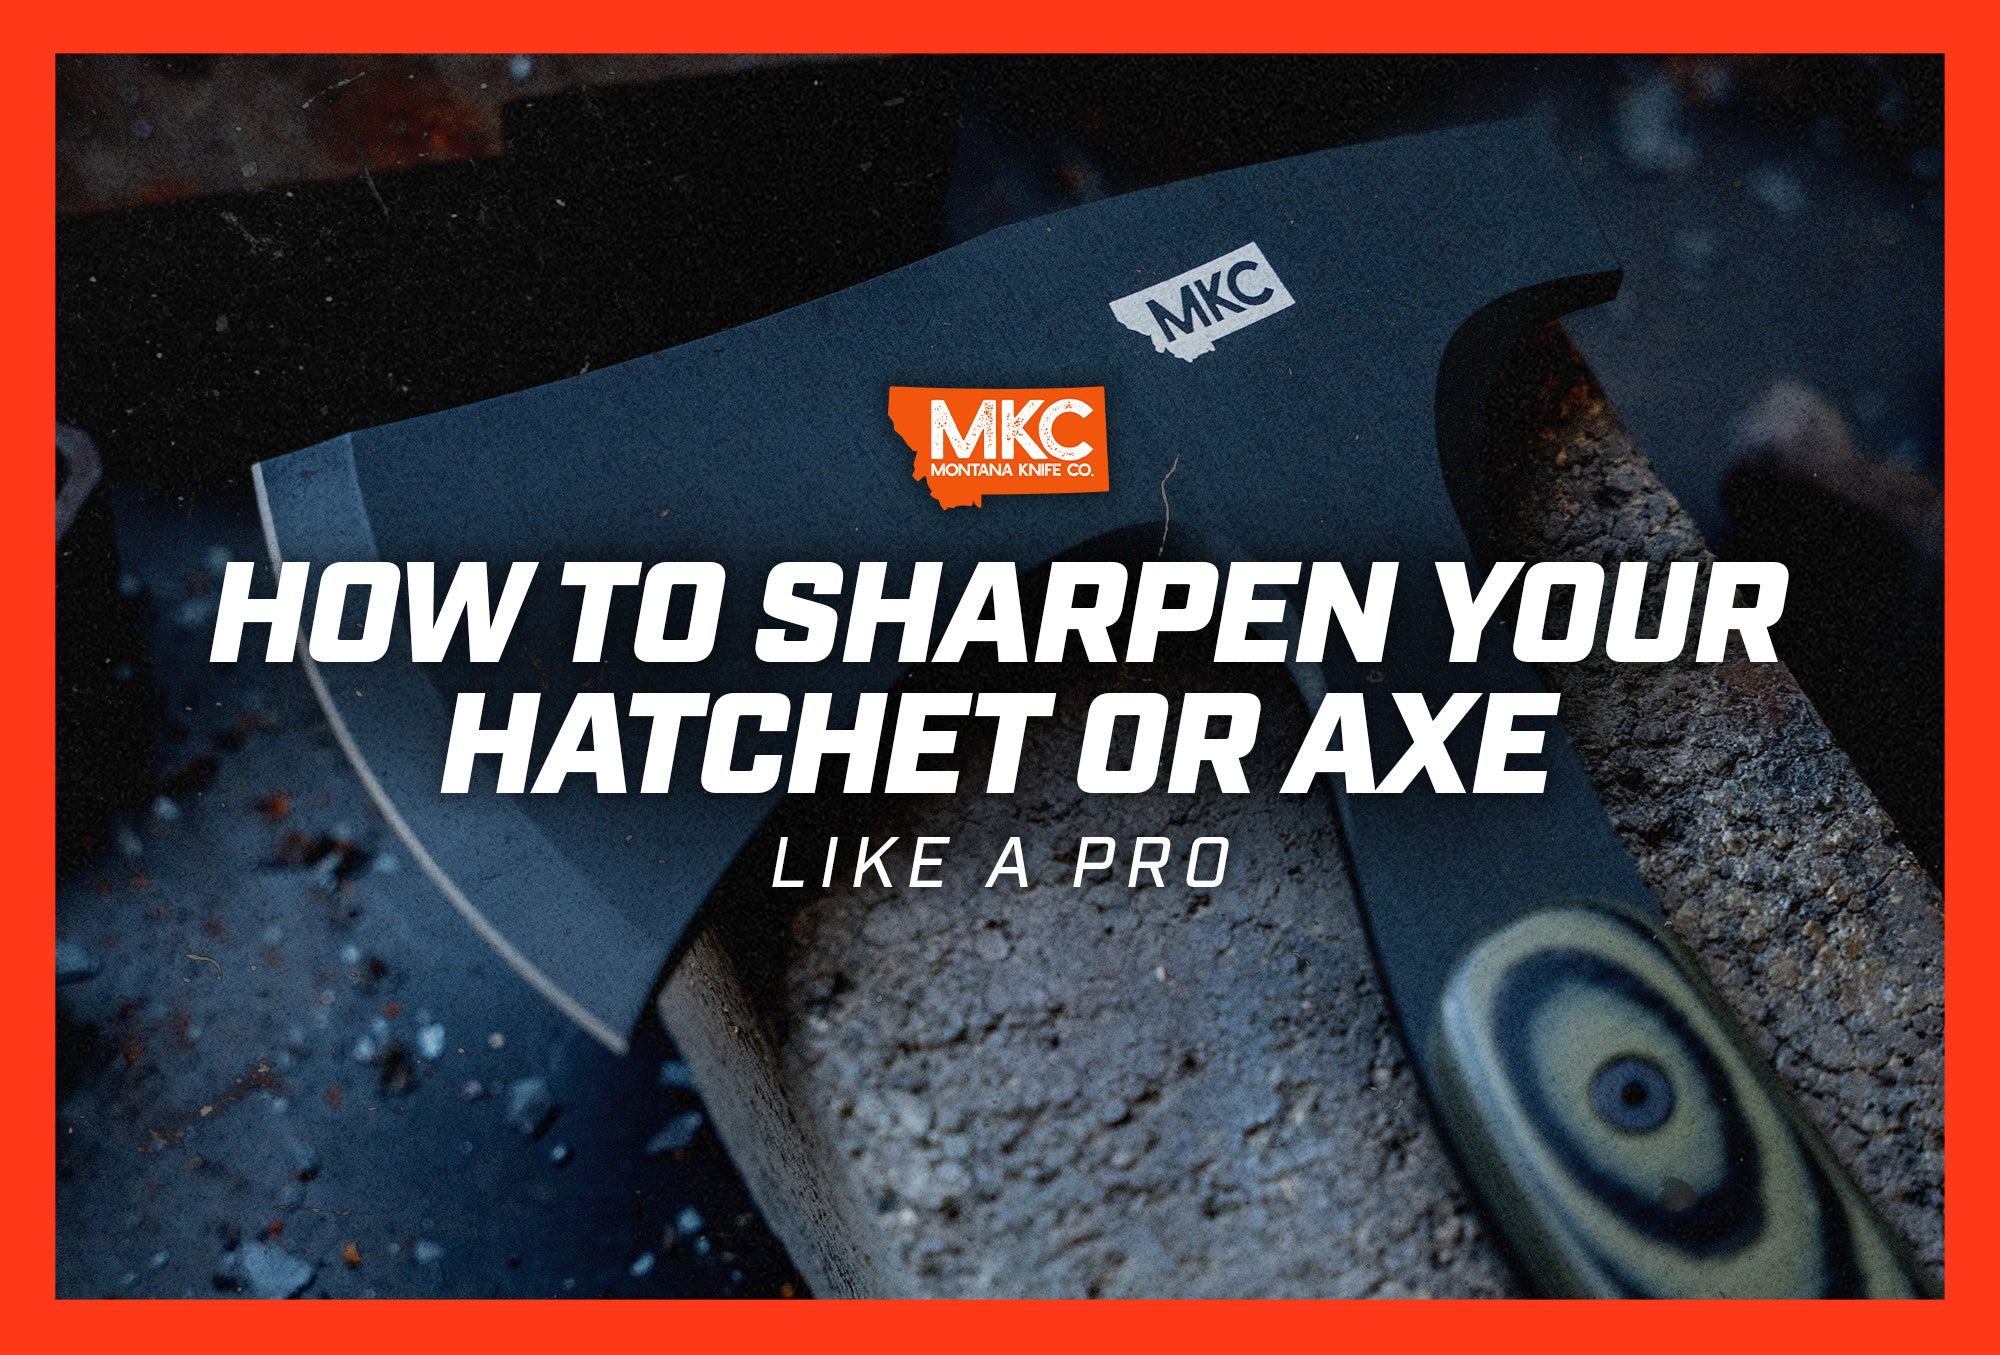 An MKC hatchet lies on a stone, representing a lesson on how to sharpen a hatchet or axe like a pro.